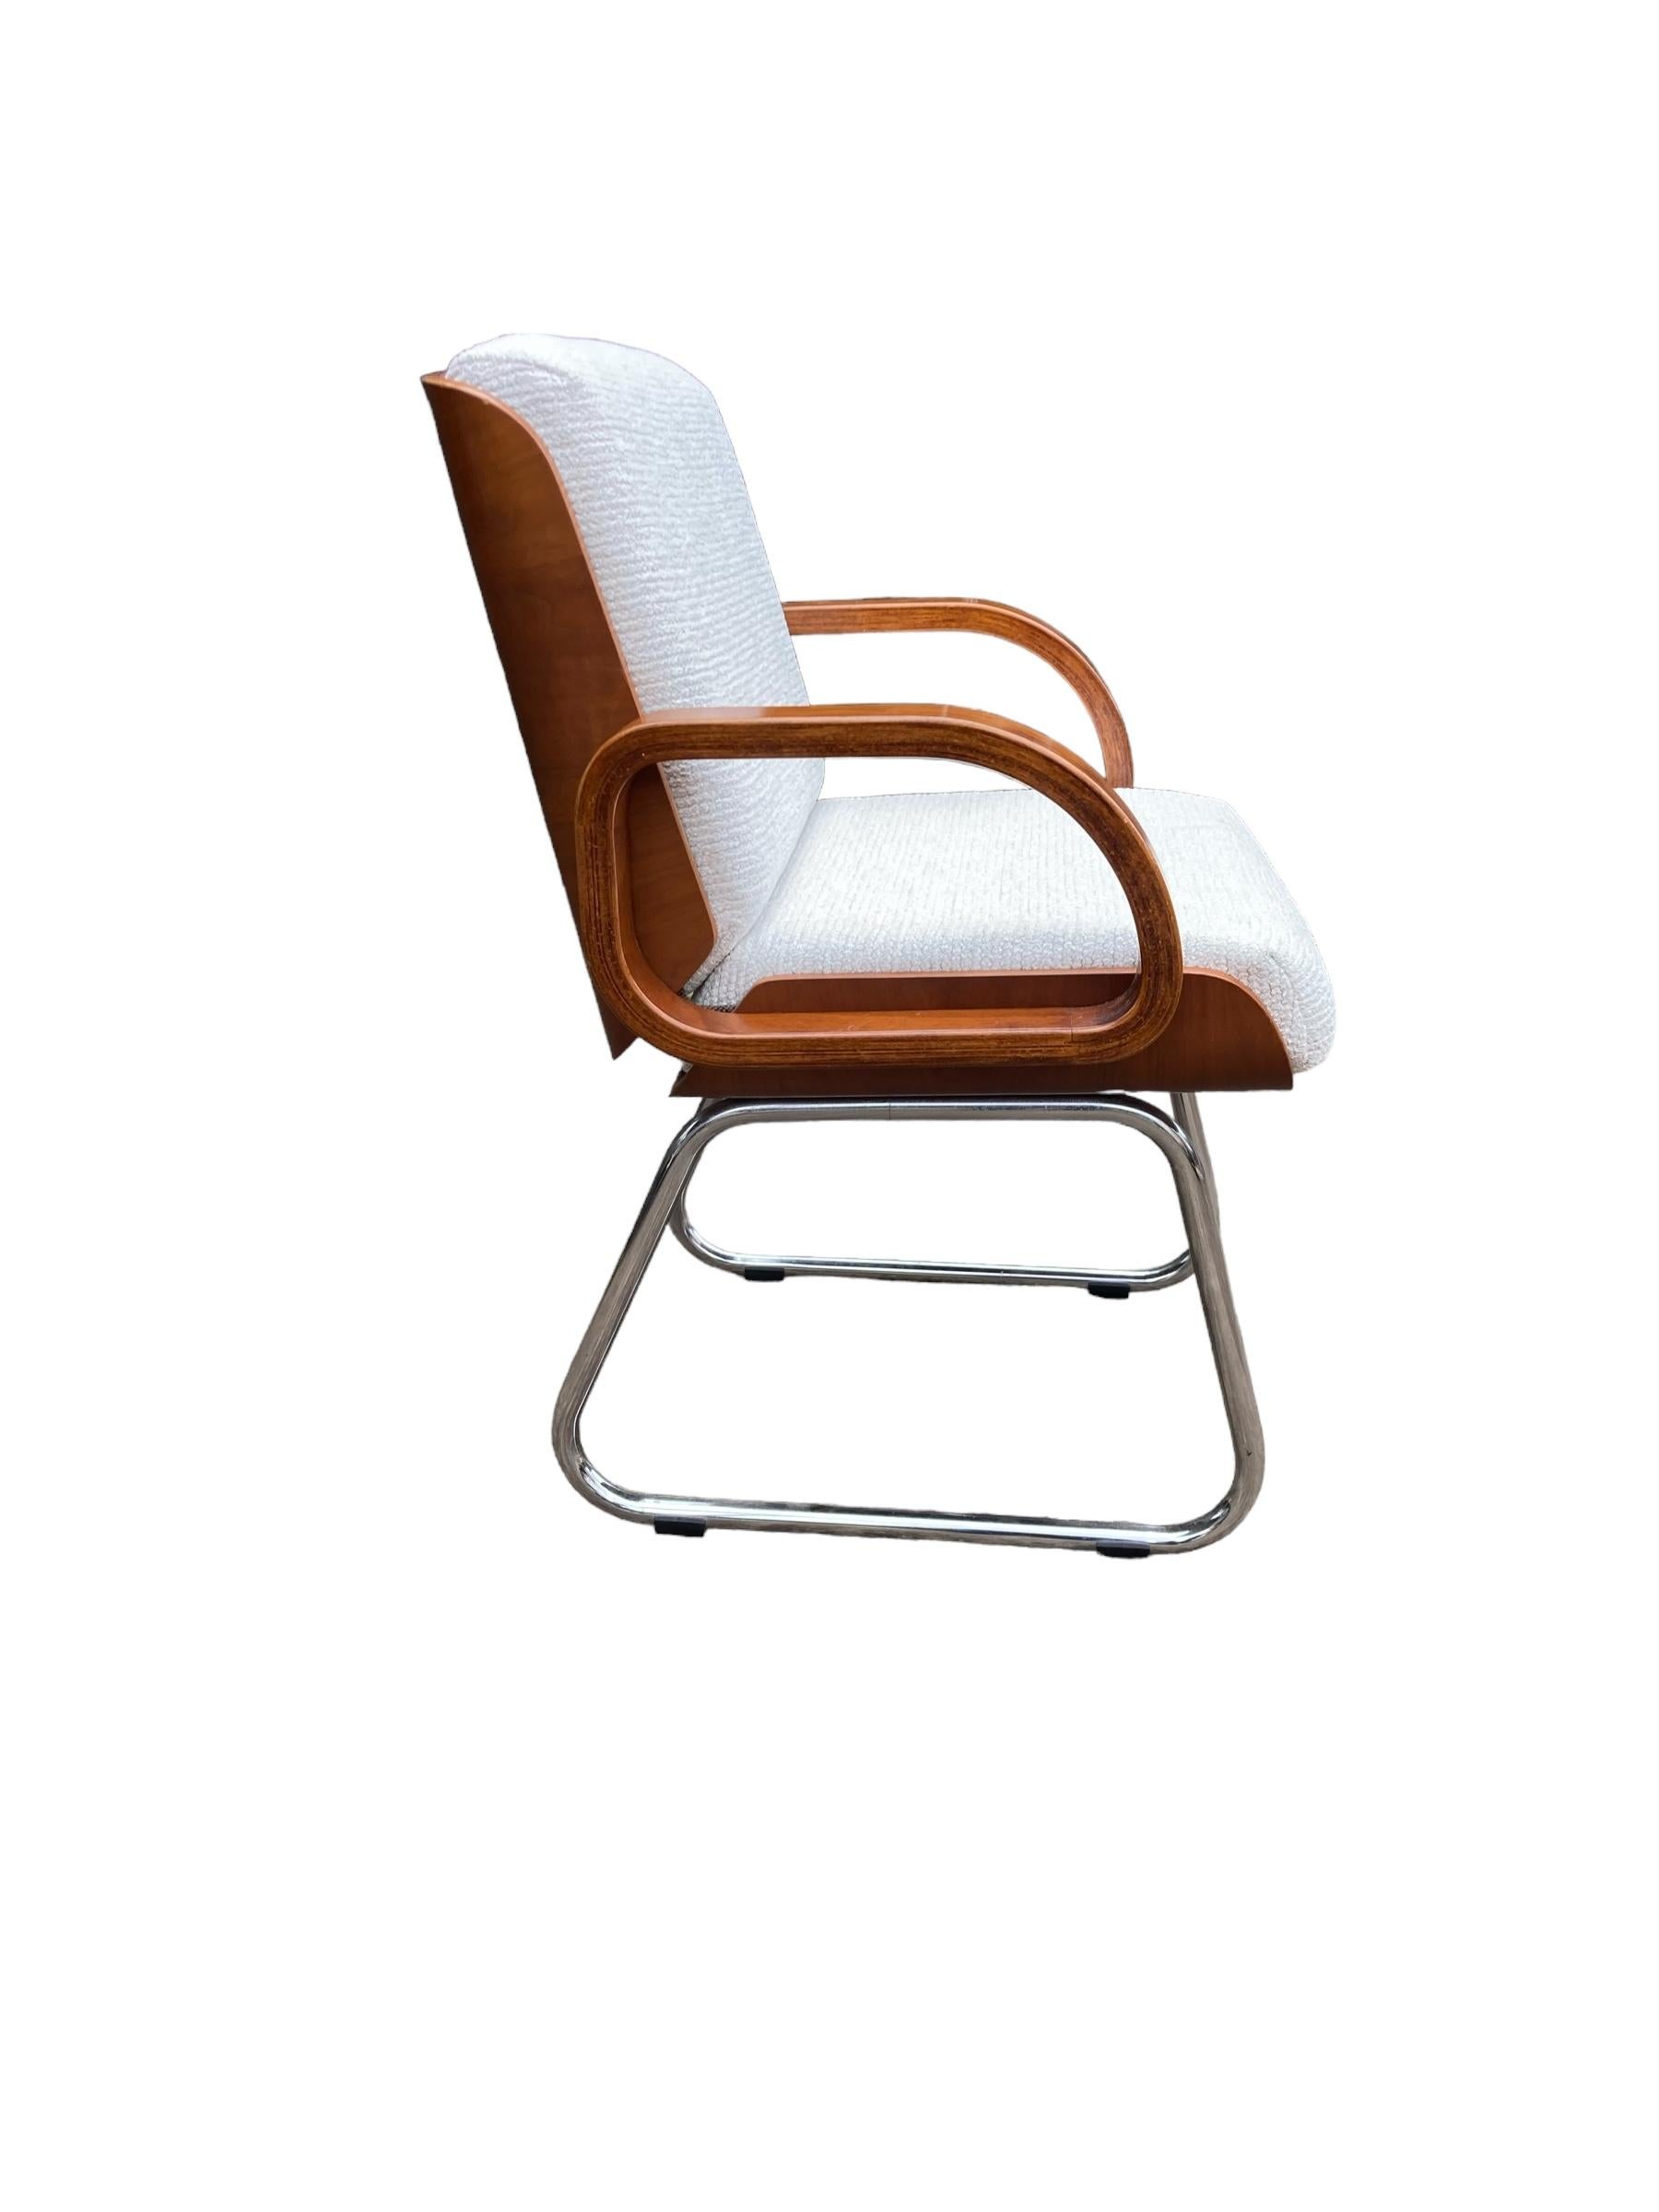 Gordon Russell Mid Century Bauhaus Style Teak and Chrome Office chair In Good Condition For Sale In Bishop's Stortford, GB